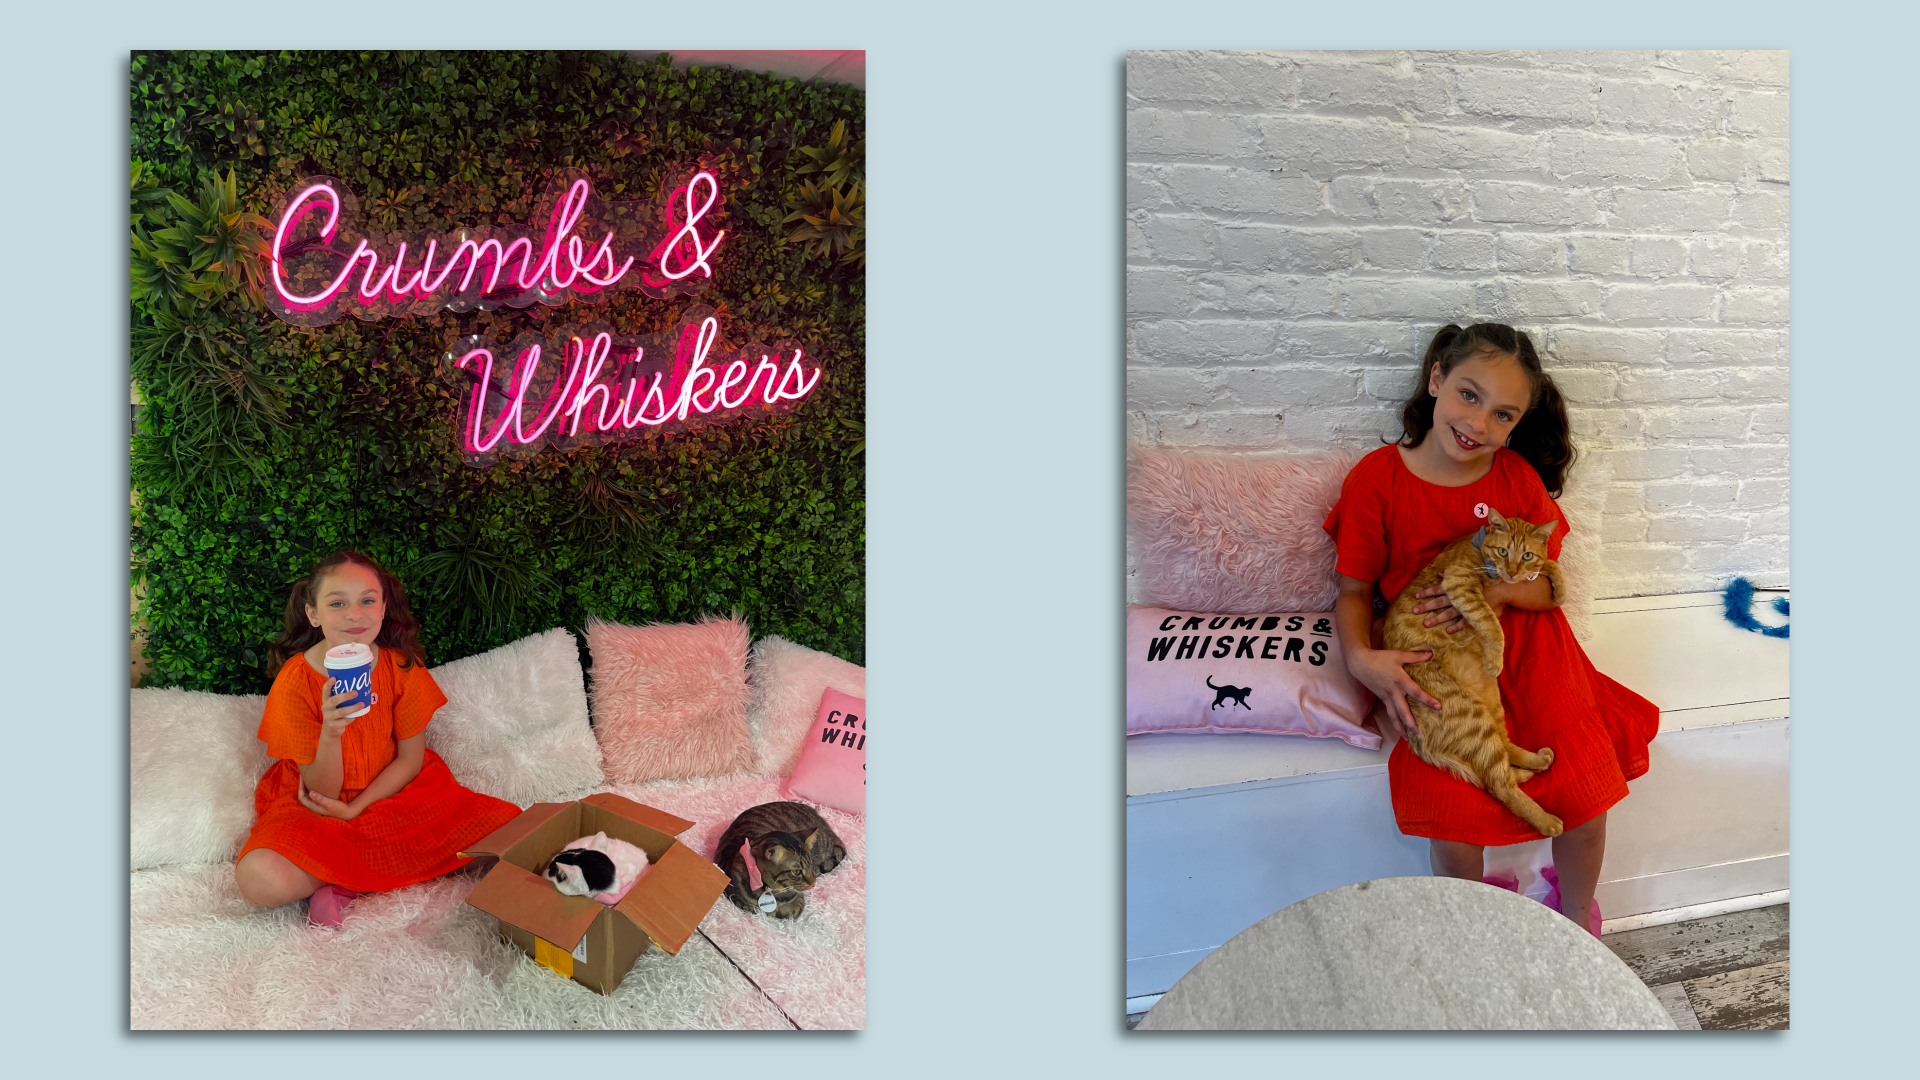 Crumbs & Whiskers cat cafe in Georgetown